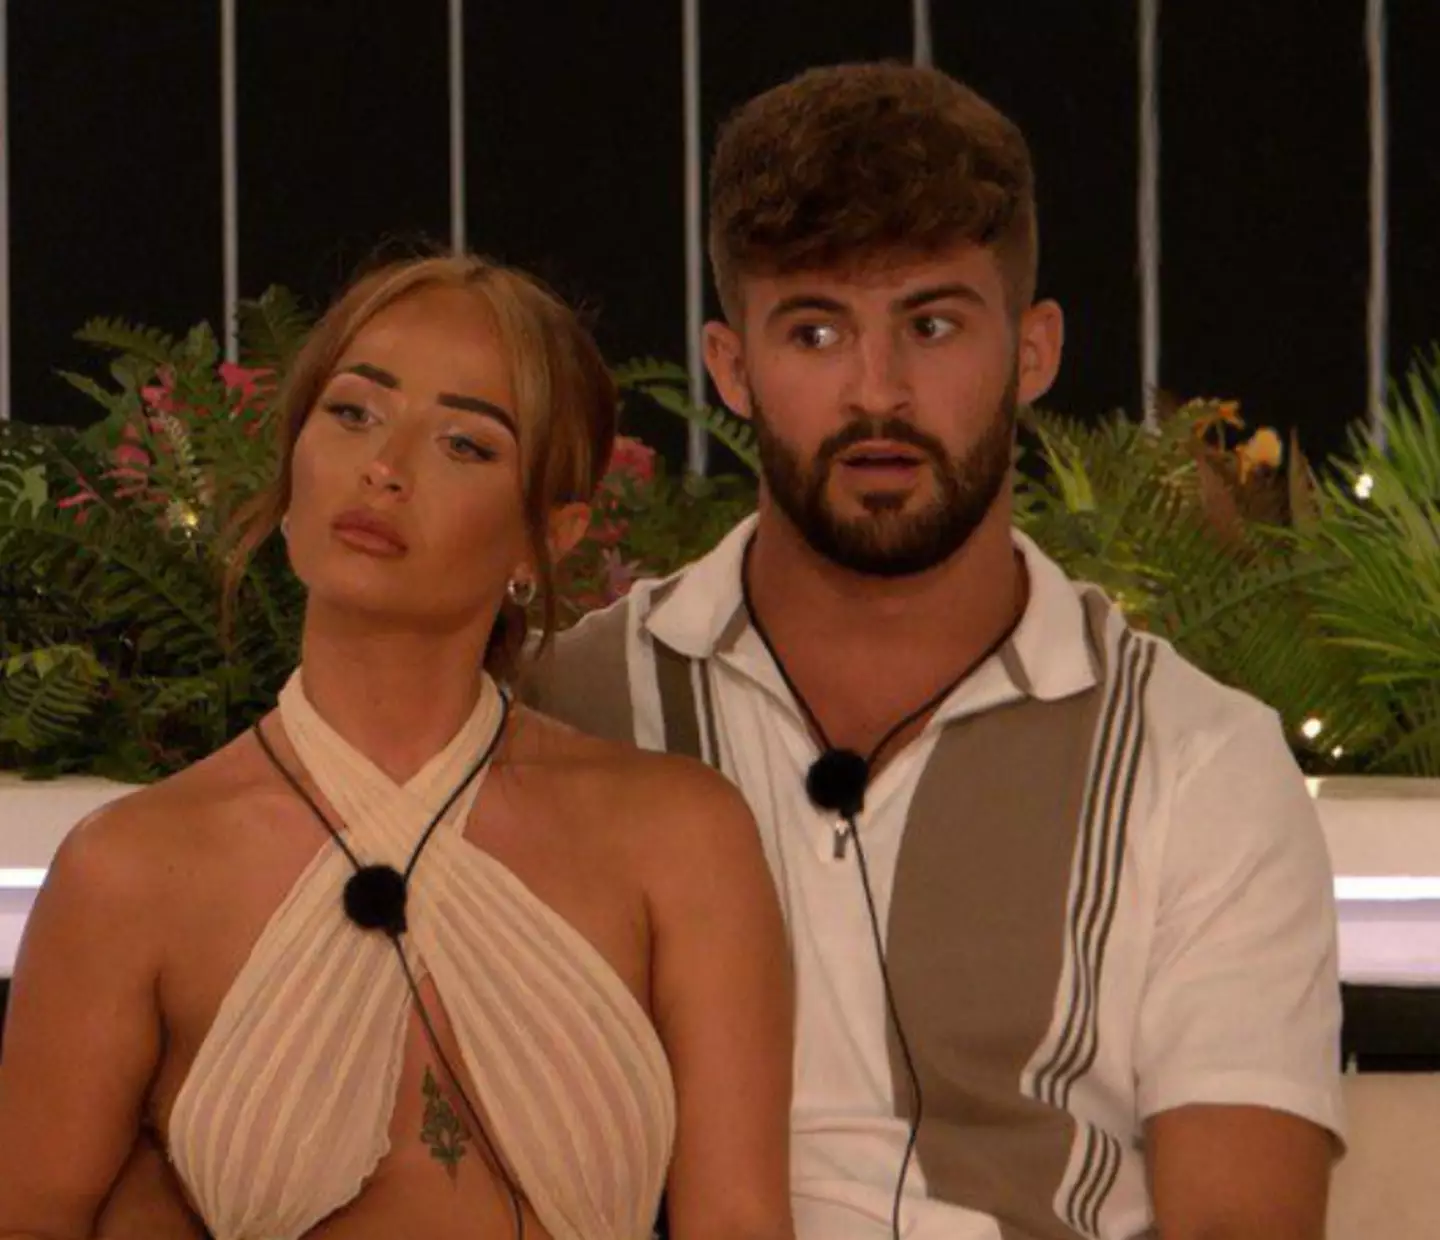 The panelists discussed Ciaran and Nicole's relationship. (ITV)